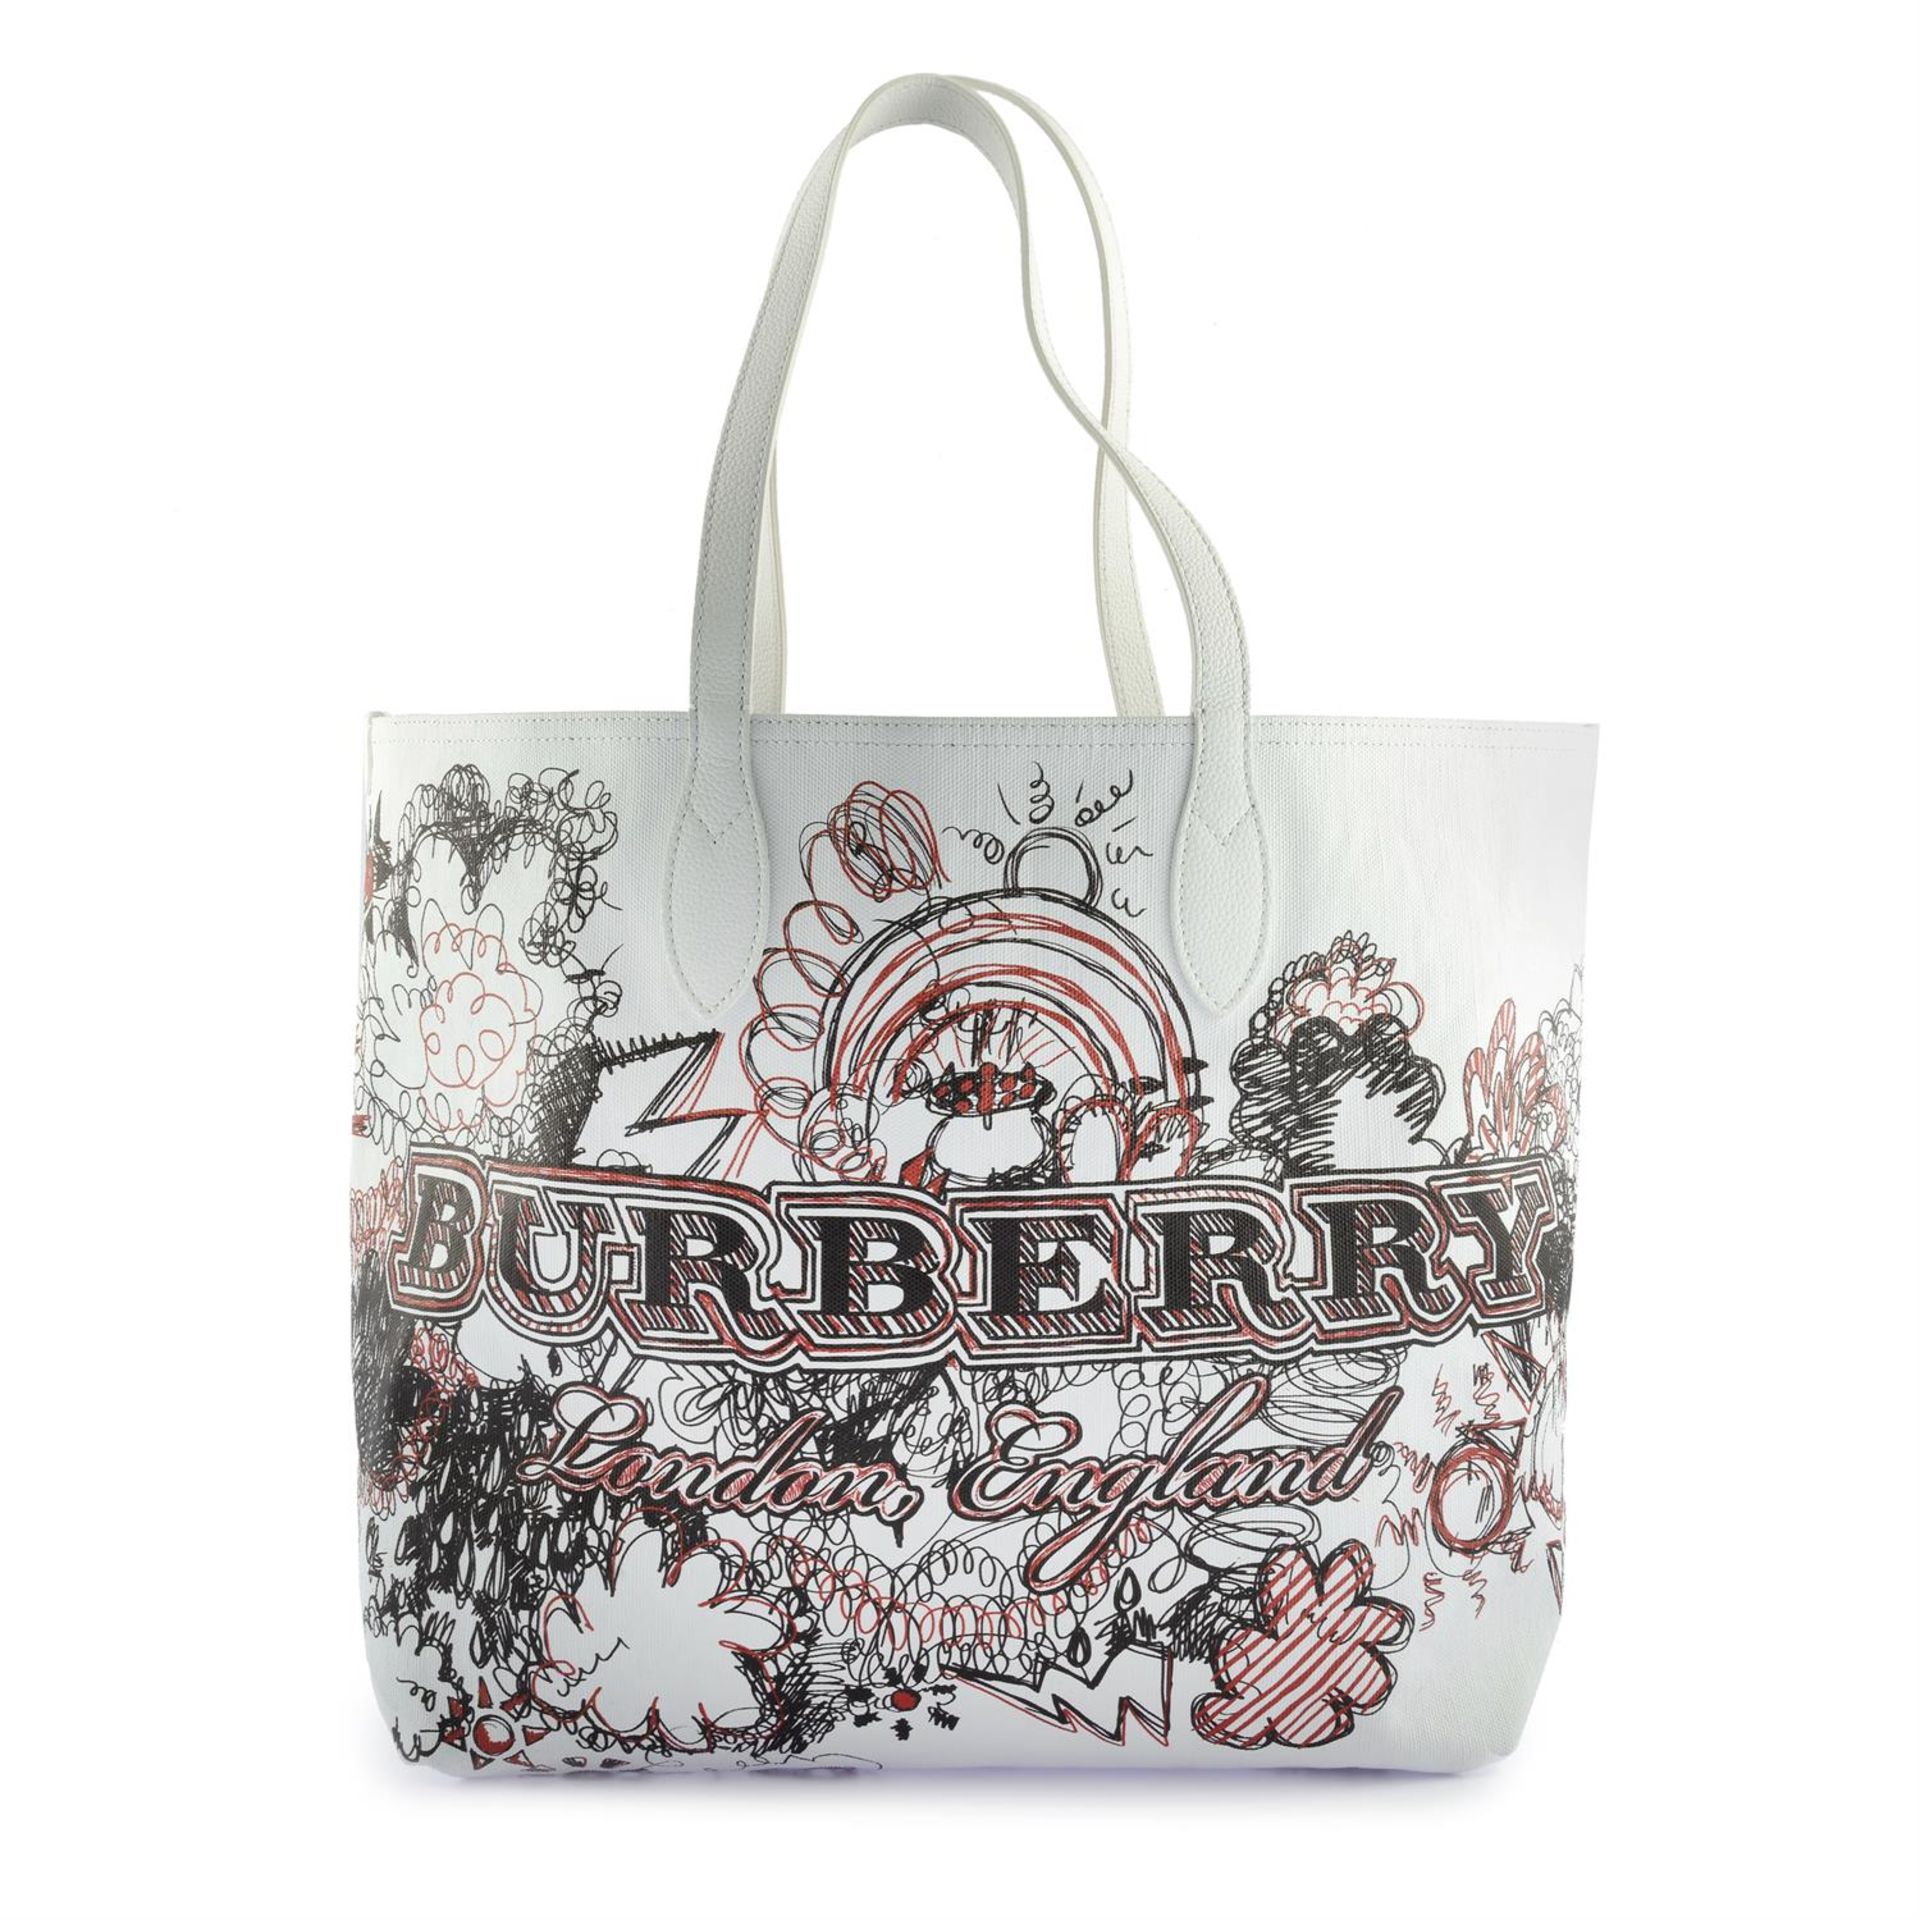 BURBERRY - a Doodle reversible shopping tote. - Image 2 of 10